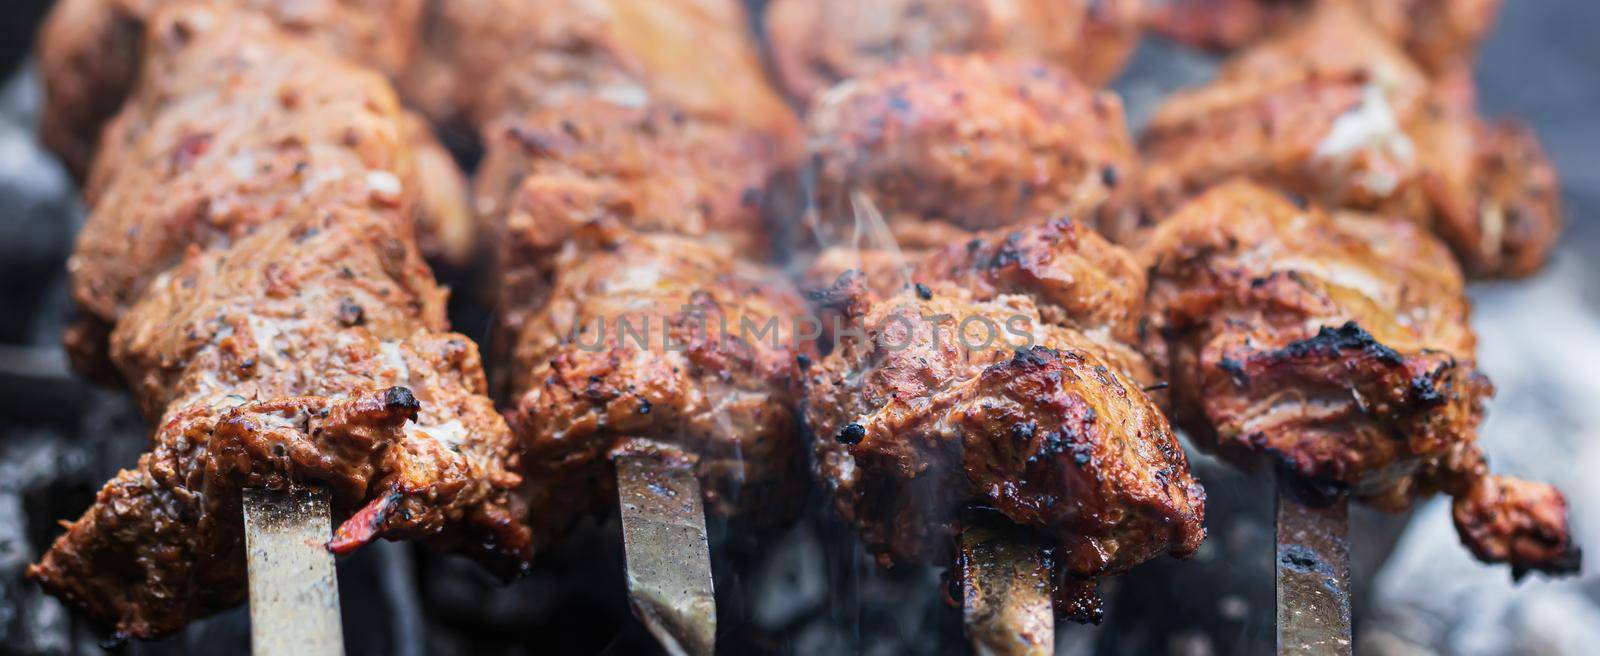 Meat on skewers. Marinated shashlik preparing on a barbecue grill over charcoal. Appetizing meat grilled on skewers. Cooking shashlik. Grilling pork on coal